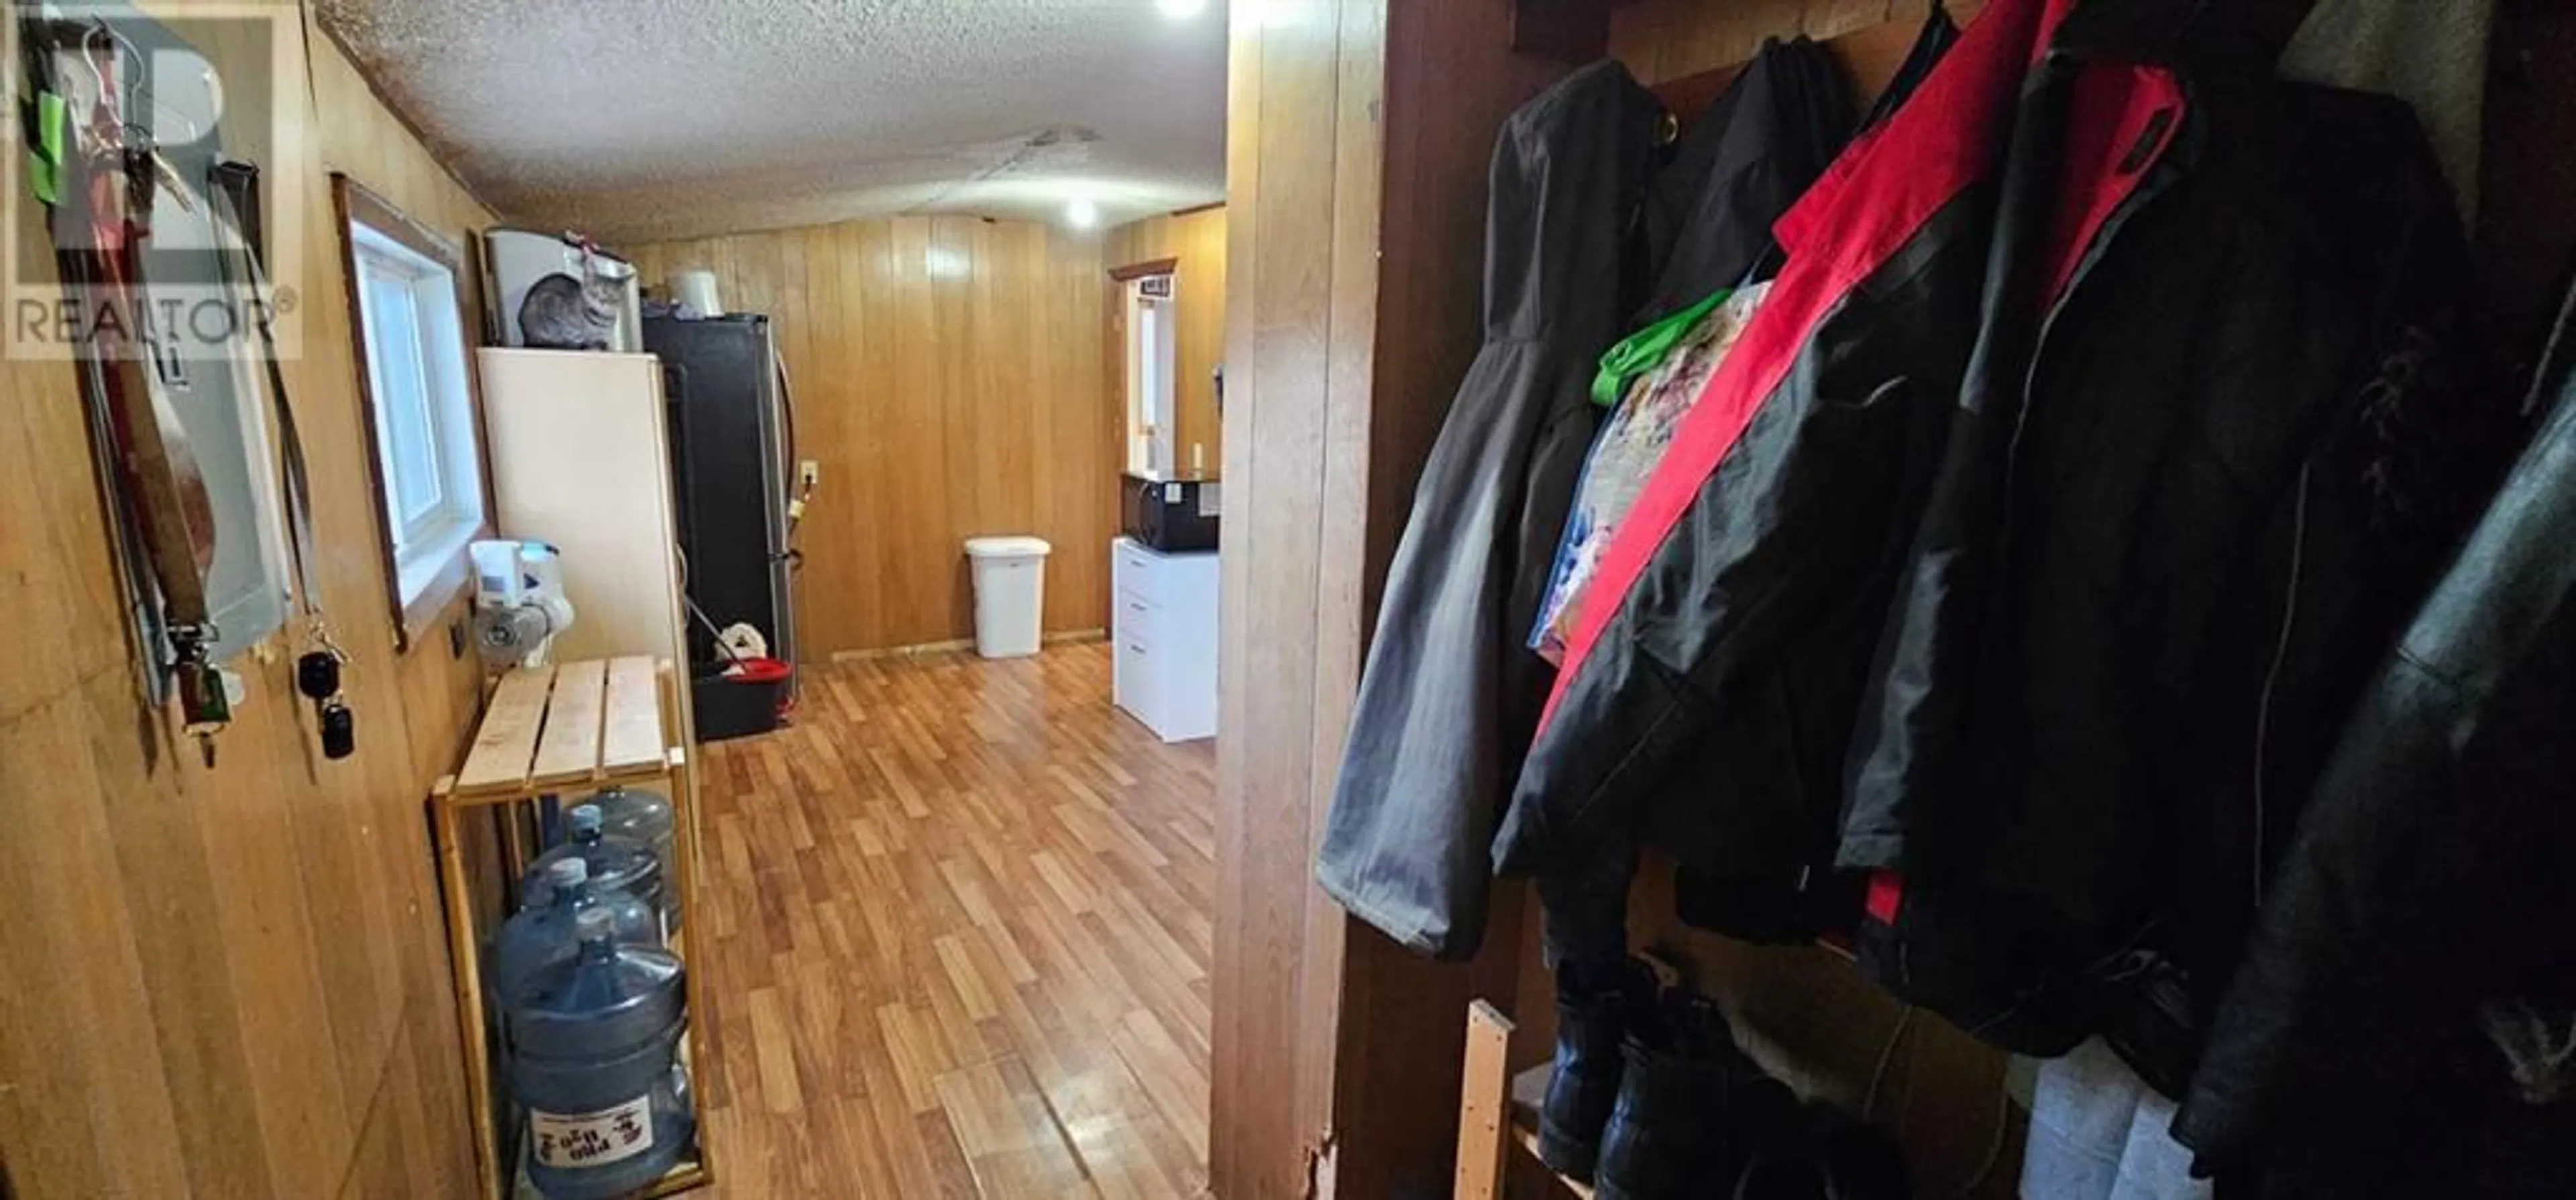 Storage room or clothes room or walk-in closet for 4901 49 Avenue, Castor Alberta T0C0X0